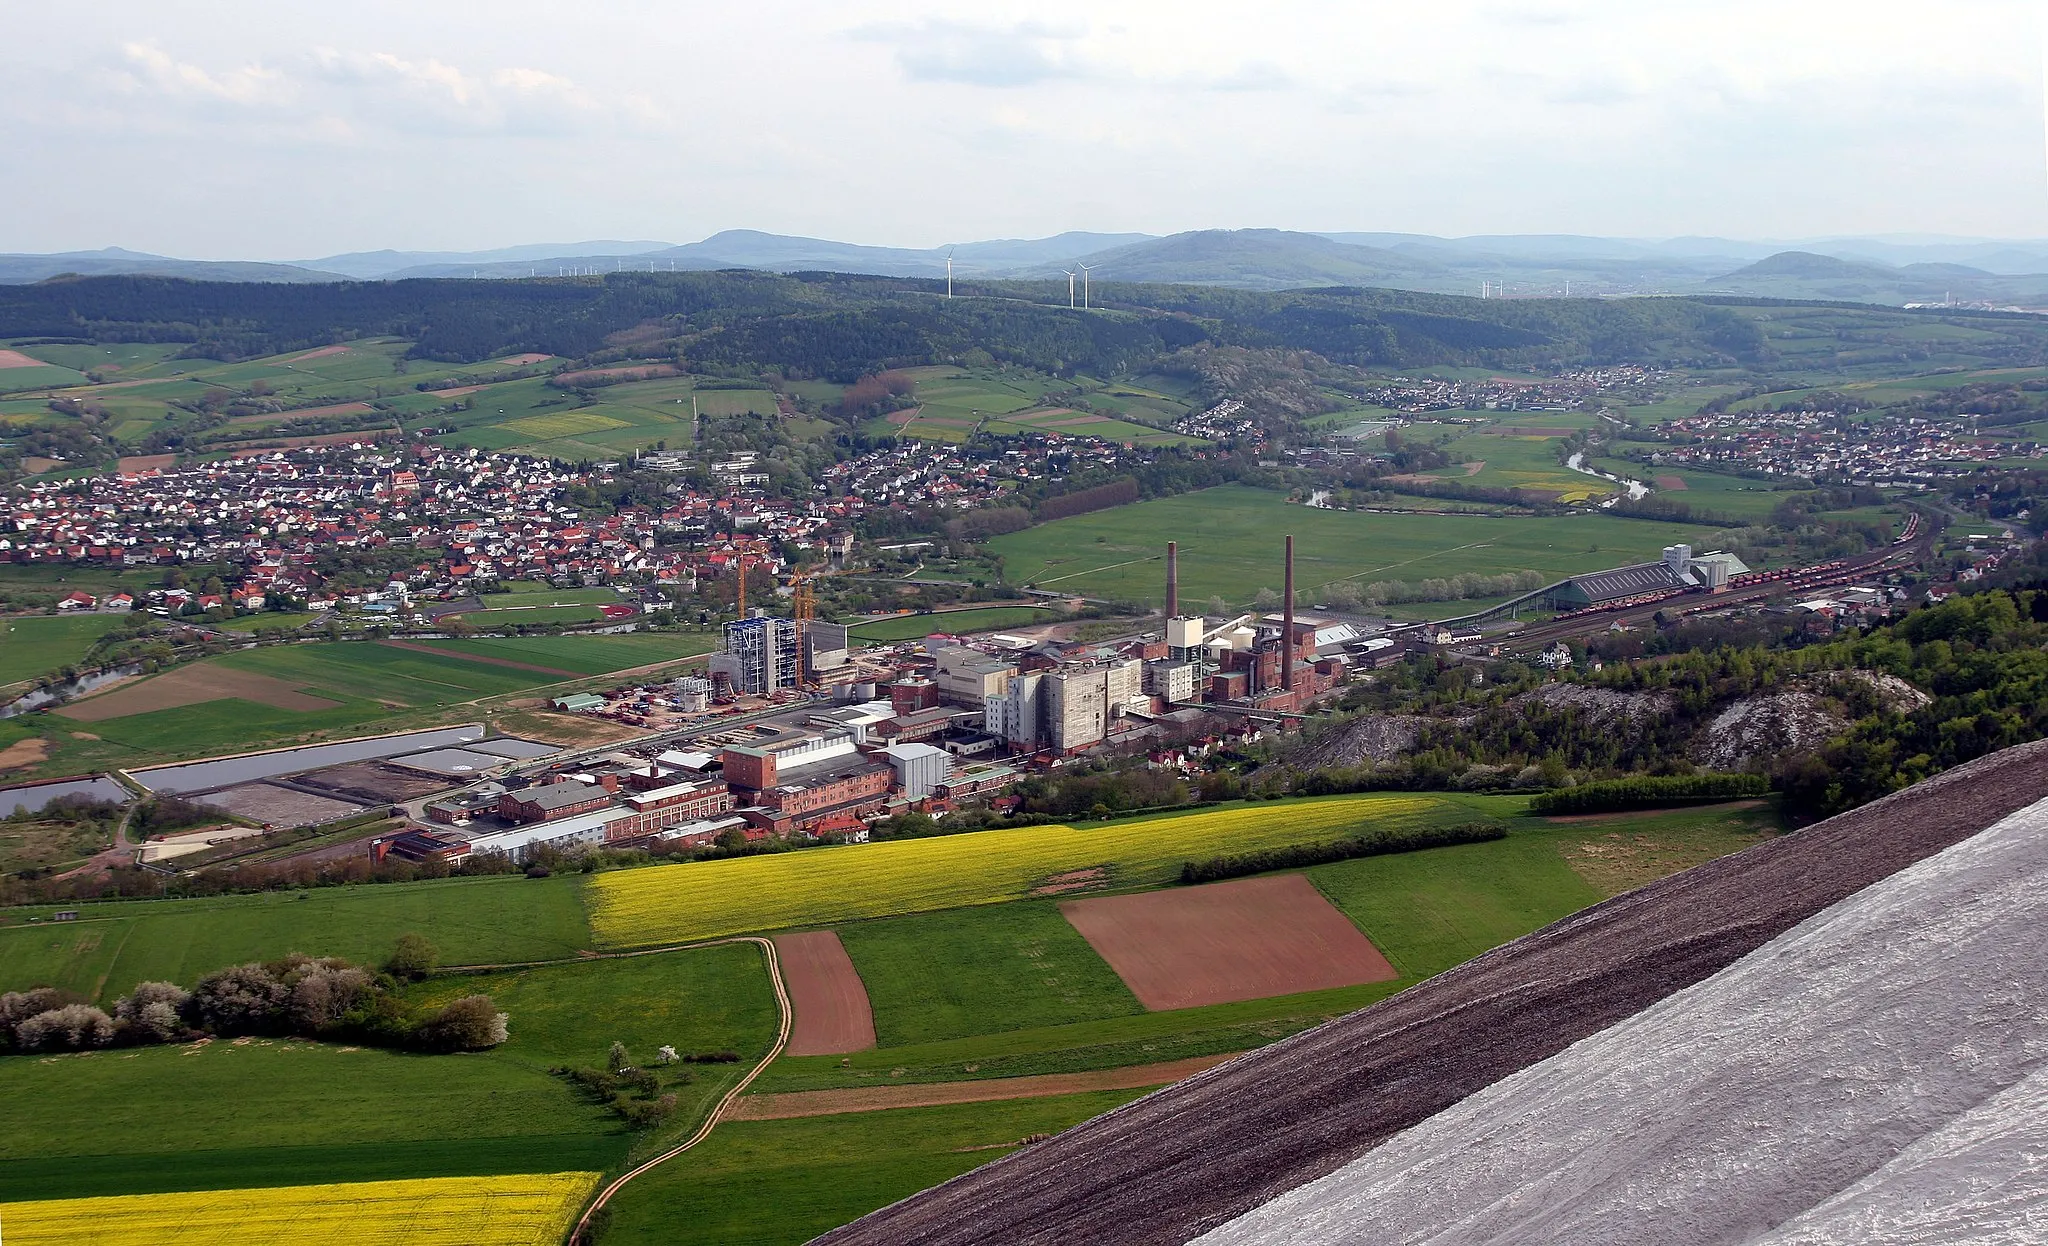 Photo showing: The Potassium-Plant Wintershall owned by K+S Kali GmbH in Heringen (Werra, Germany). The worlds largest potassium-plant. Picture made from the Monte Kali. In the Background the city of Heringen